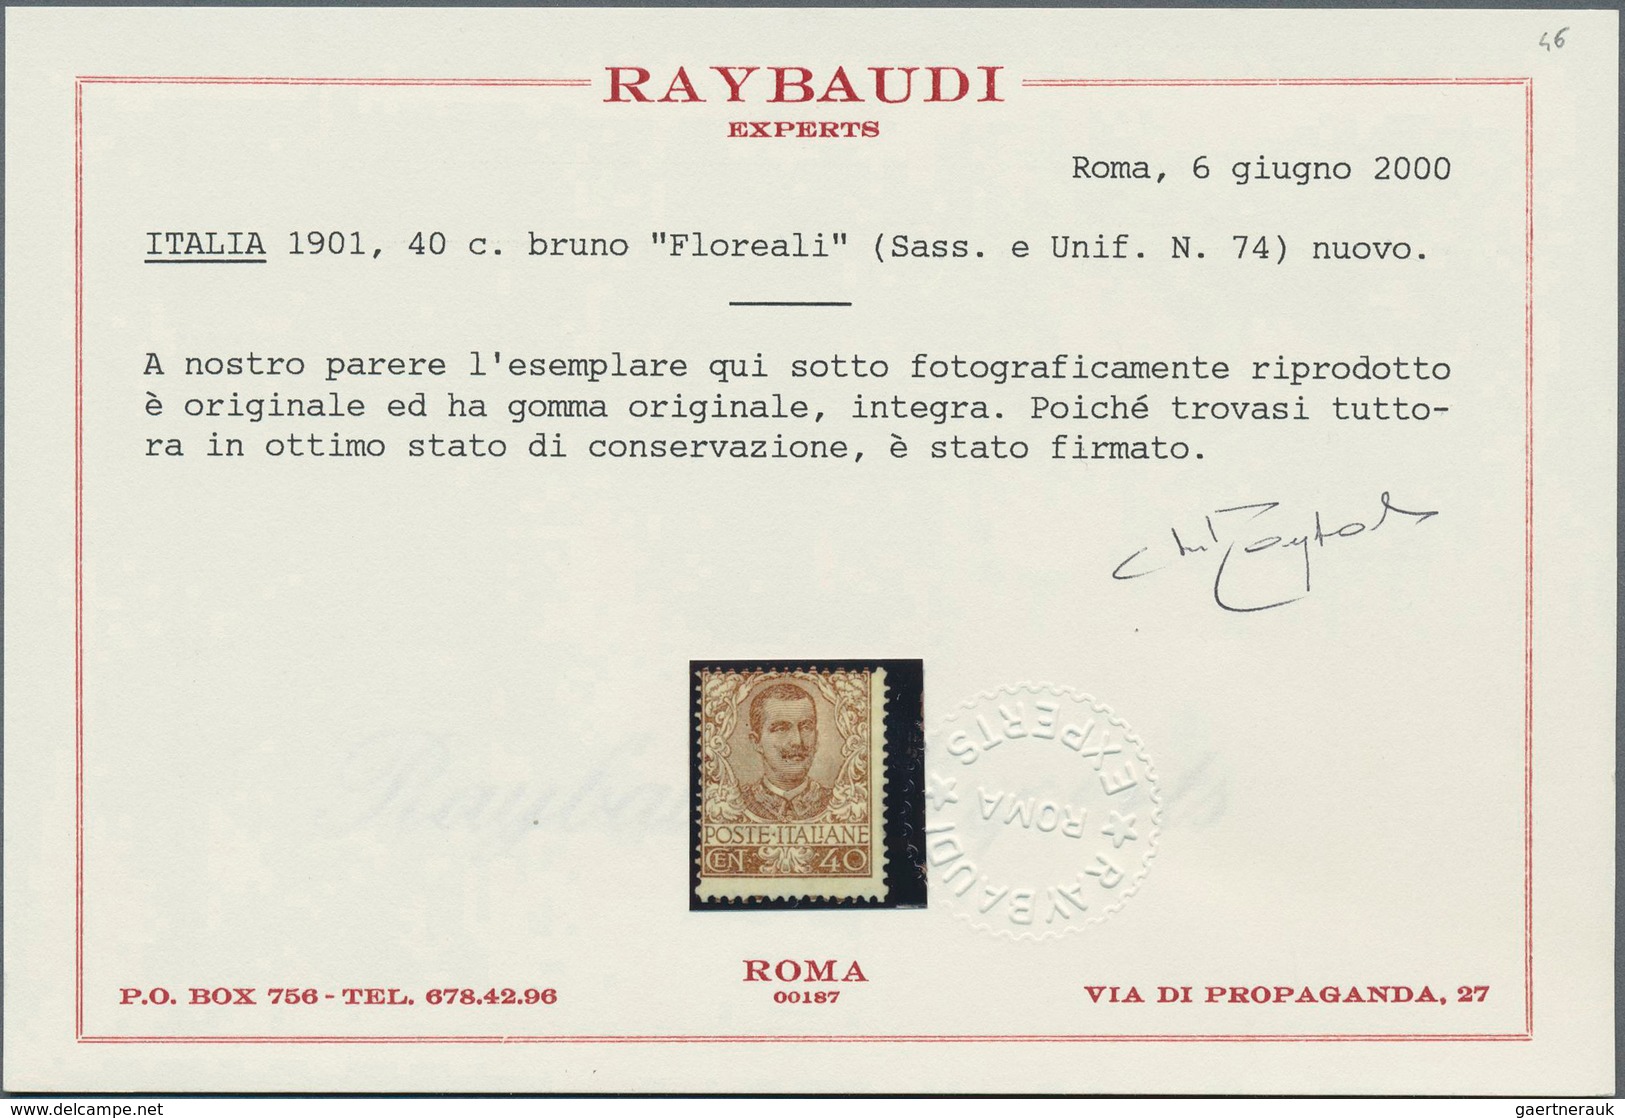 Italien: 1901, Floreali 40c. Brown, Fresh Colour, Well Perforated, Unmounted Mint, Signed And Certif - Mint/hinged